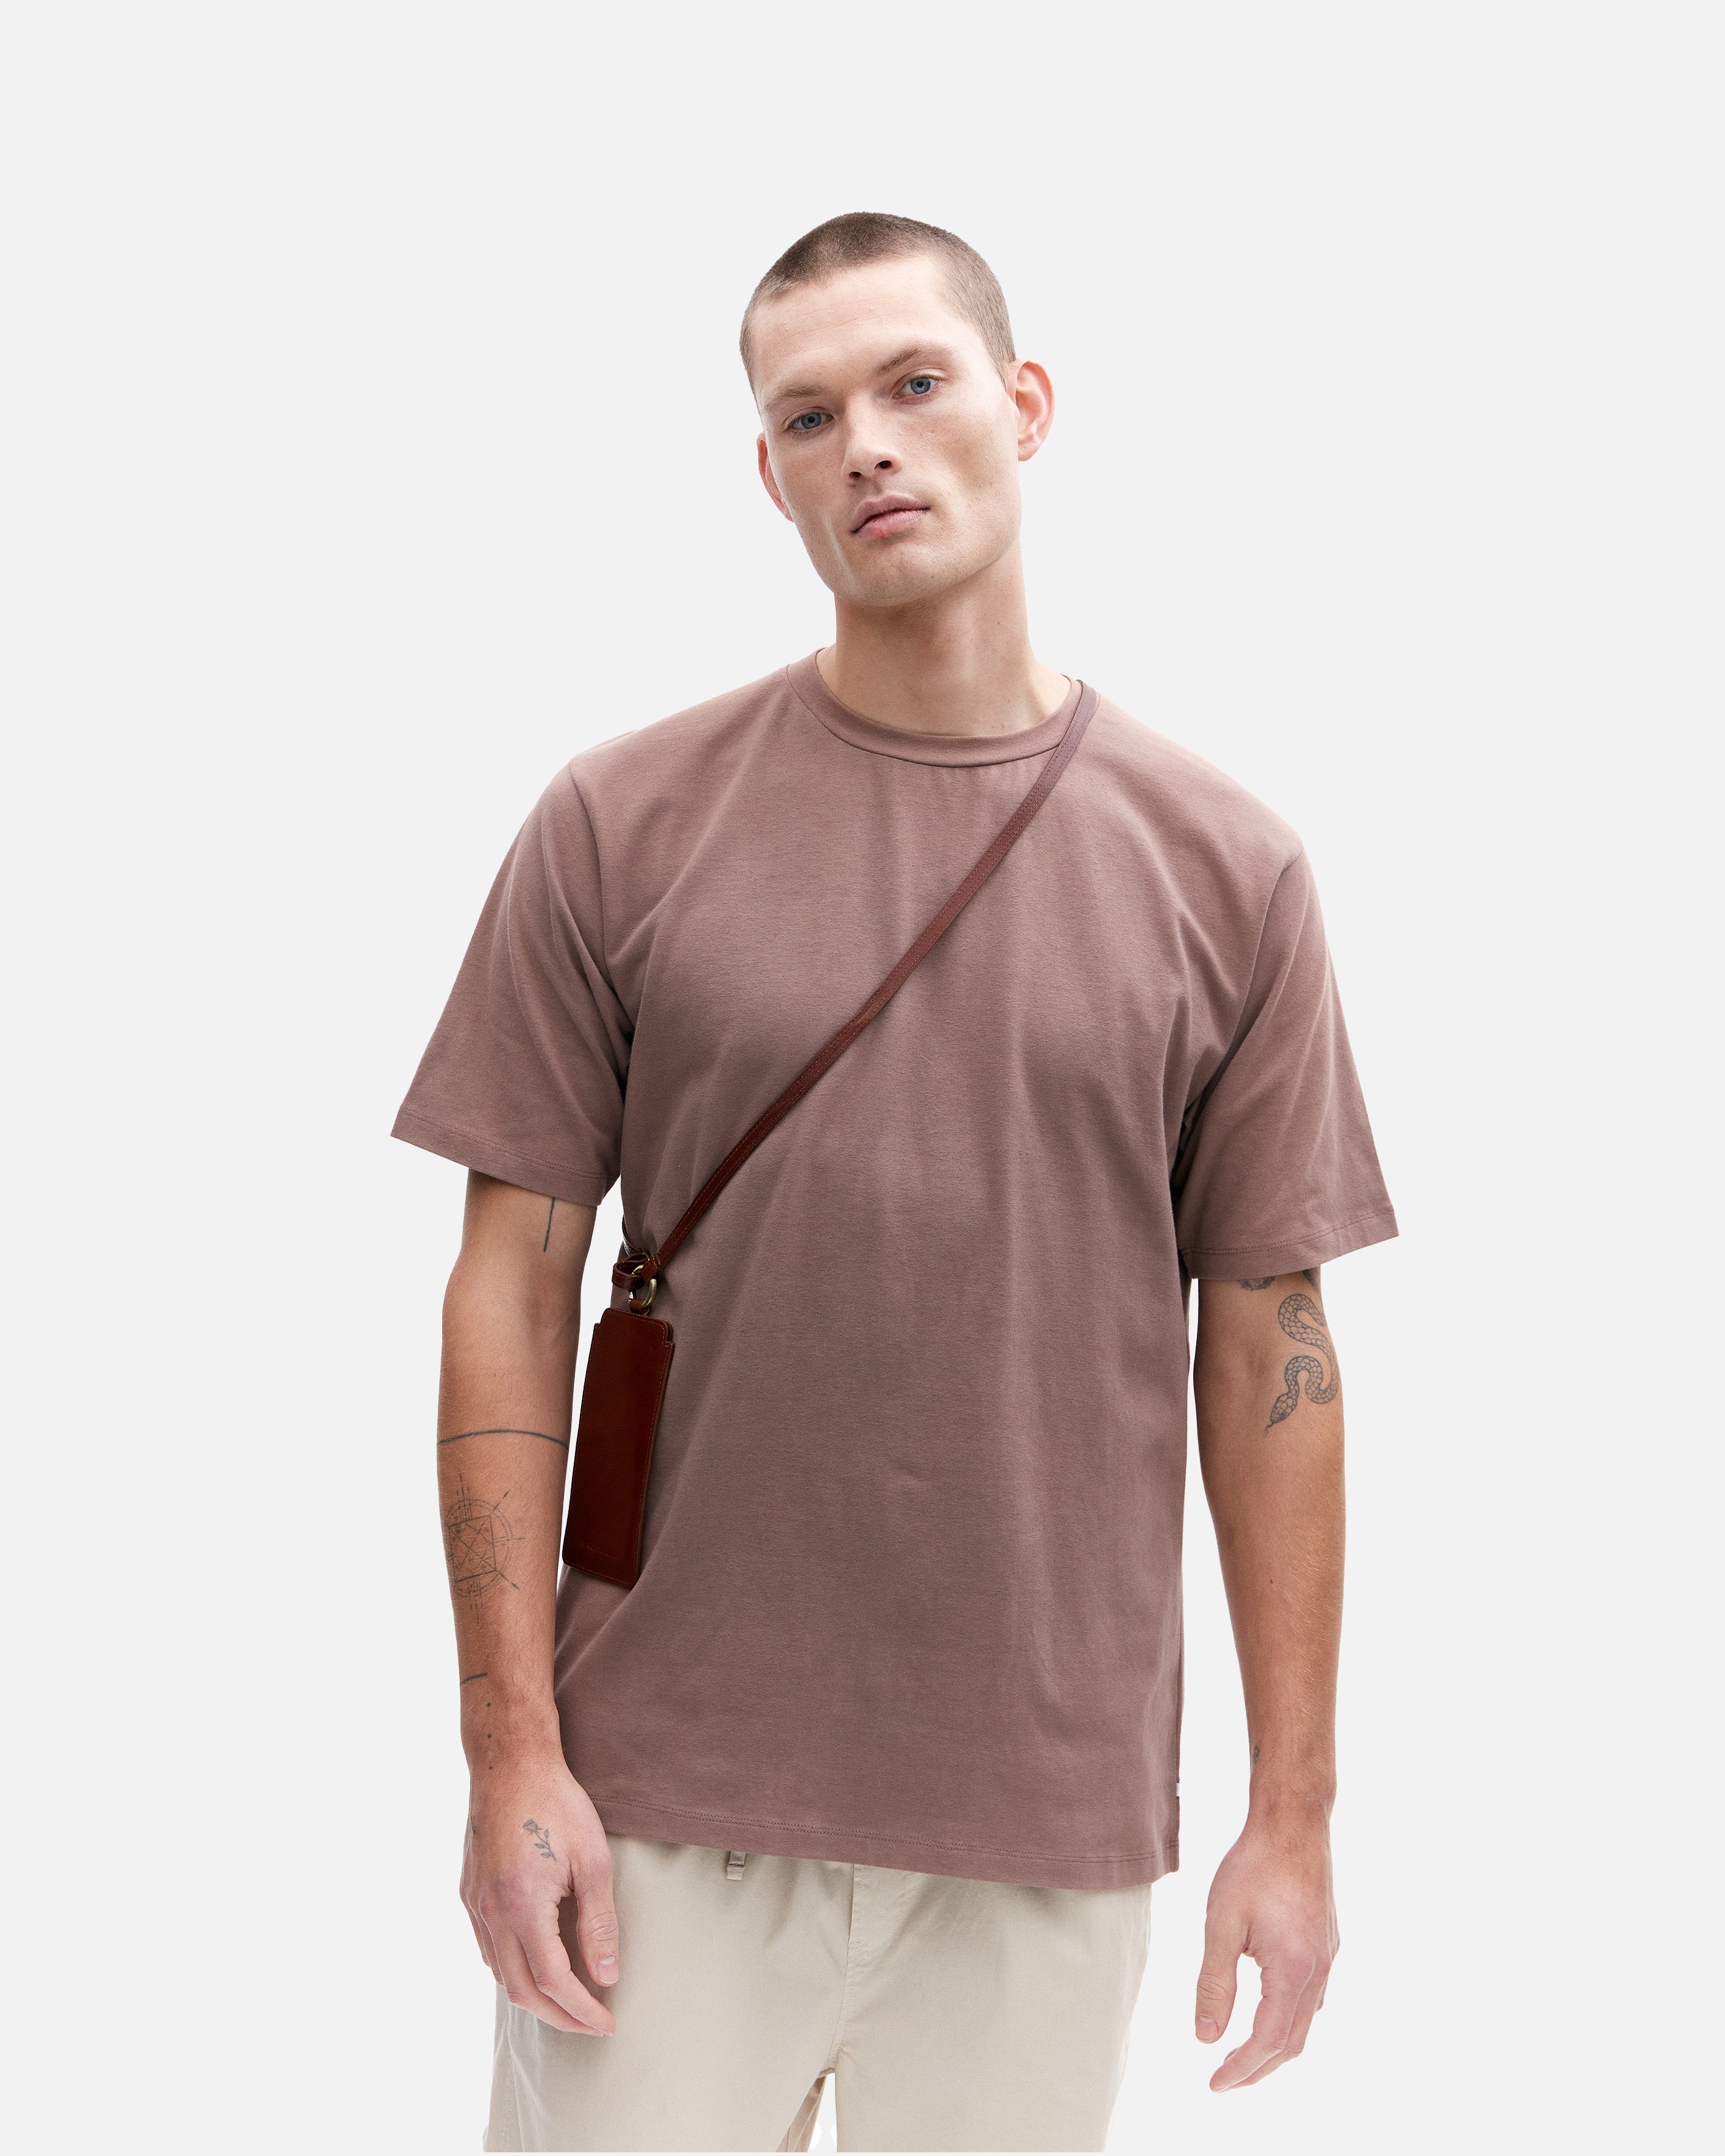 Relaxed Fit tee